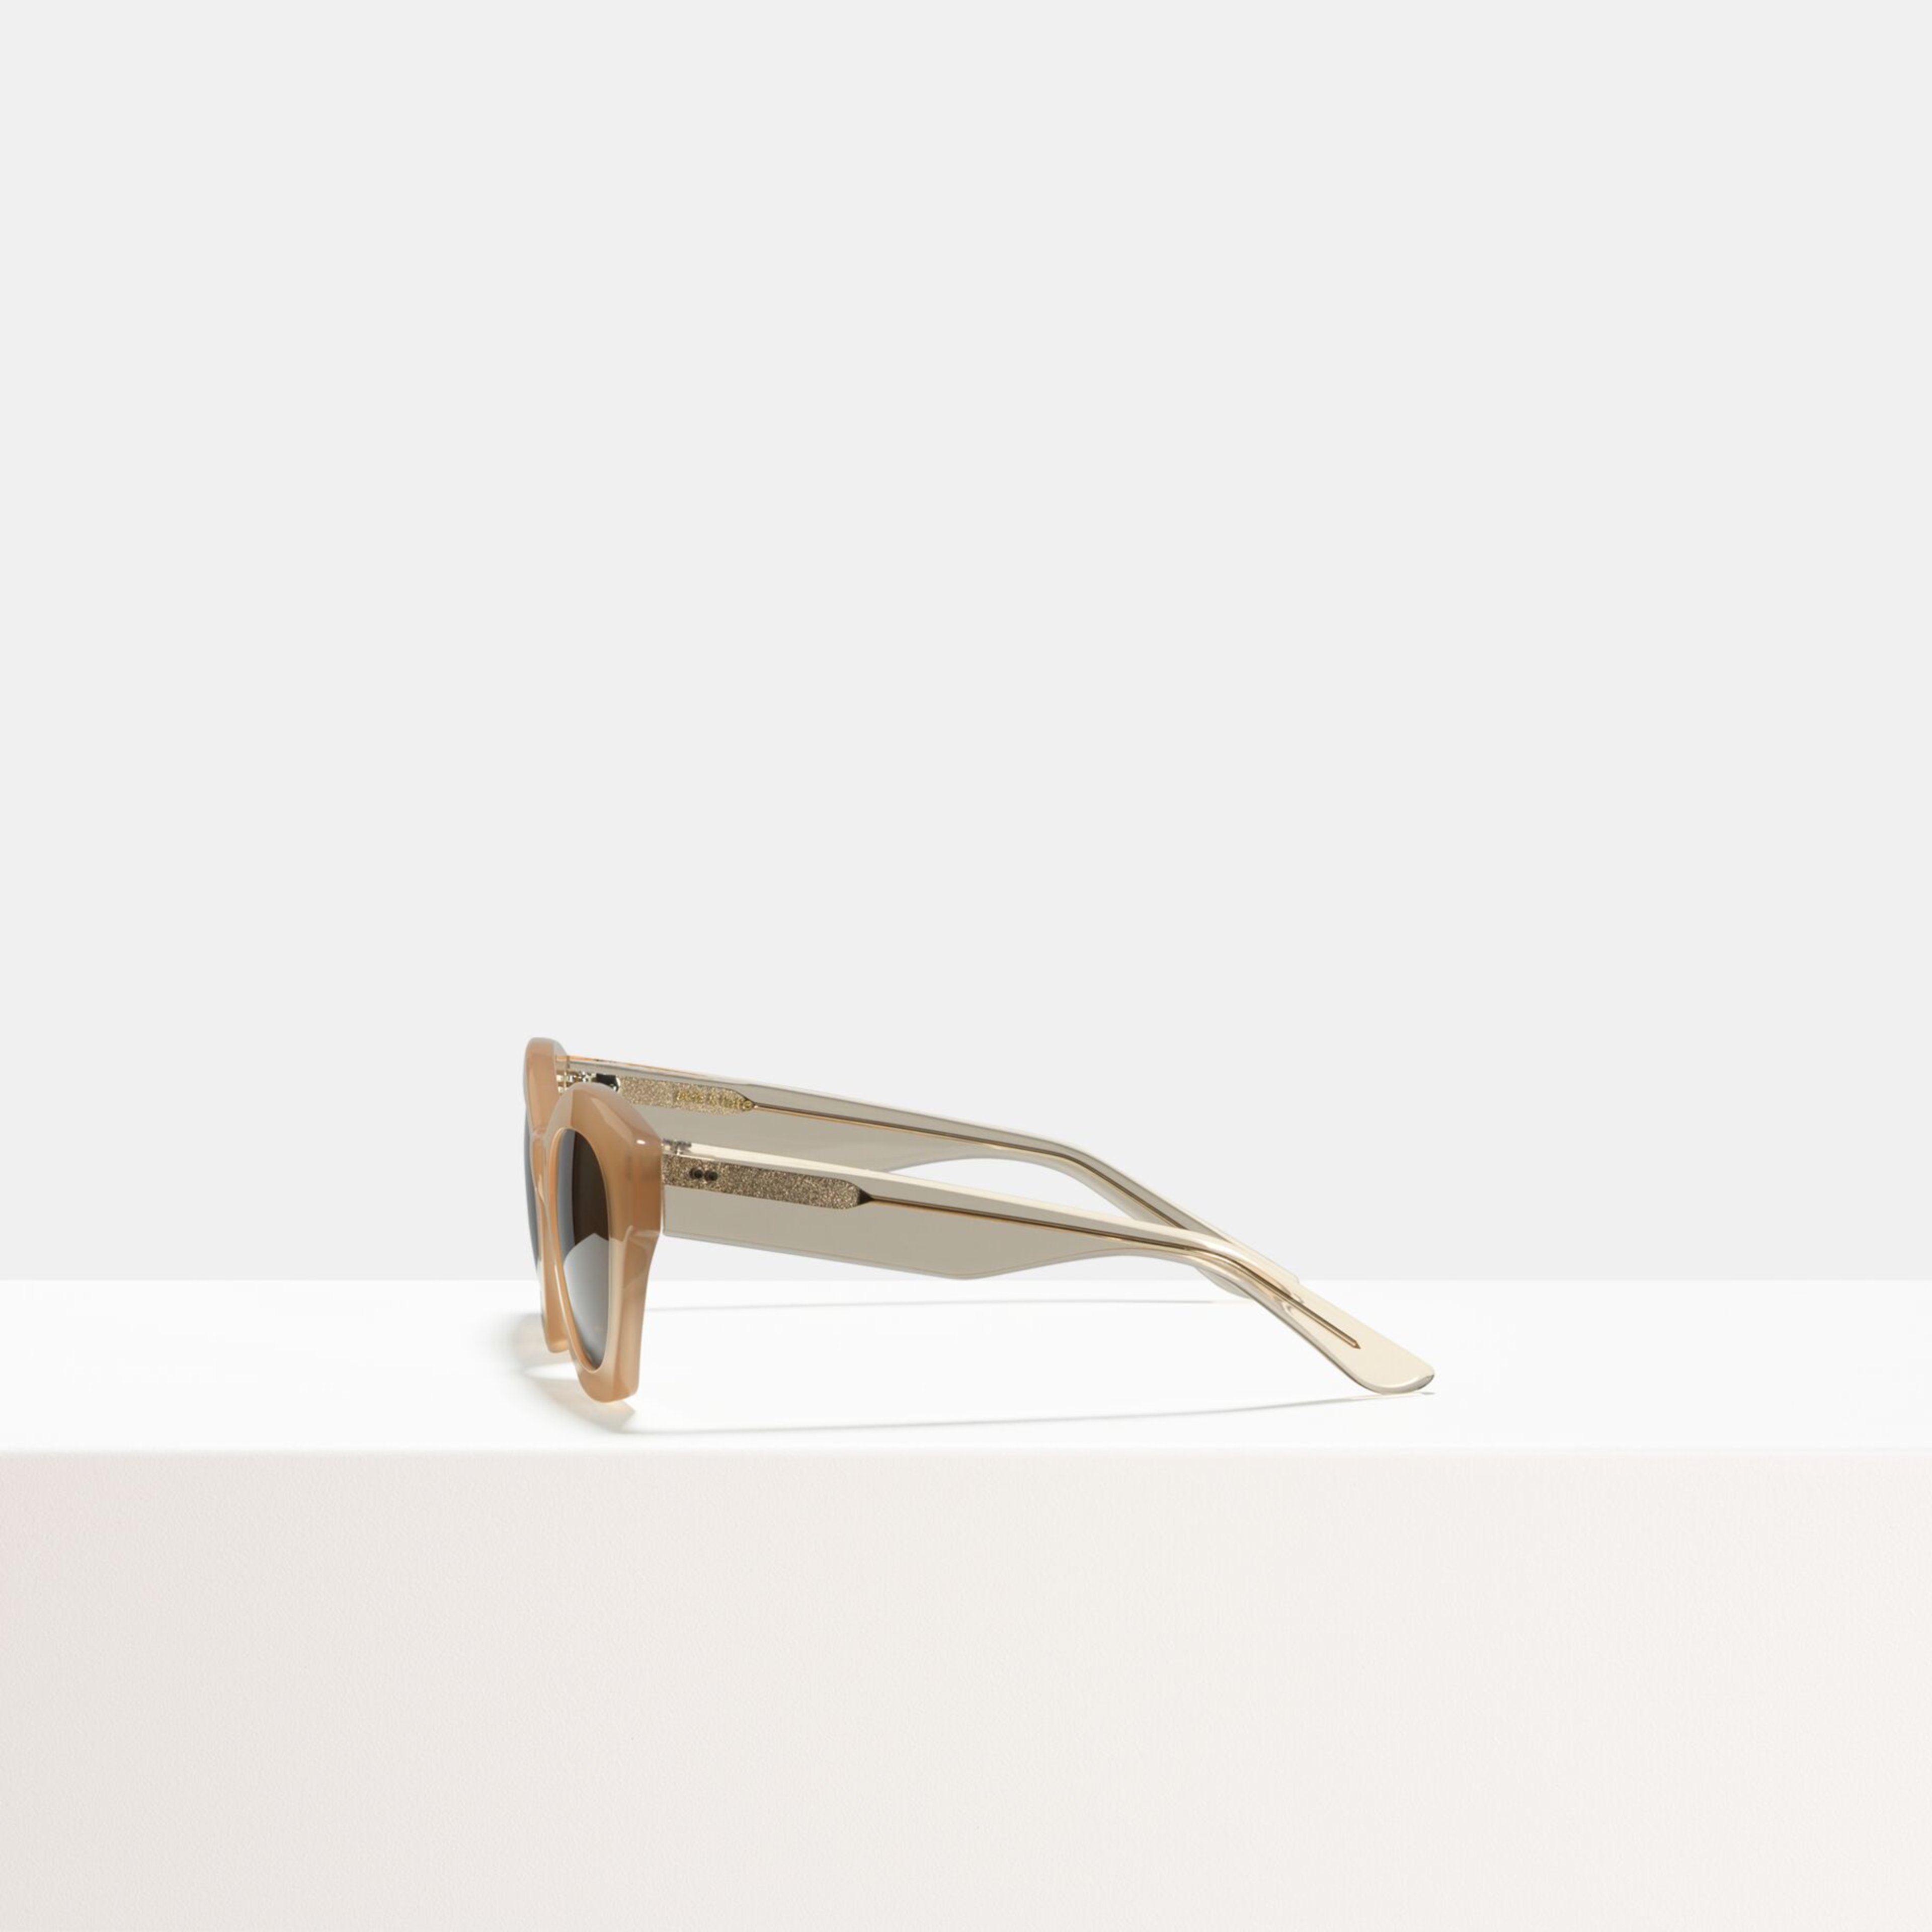 Ace & Tate Solaires |  Acétate in Beige